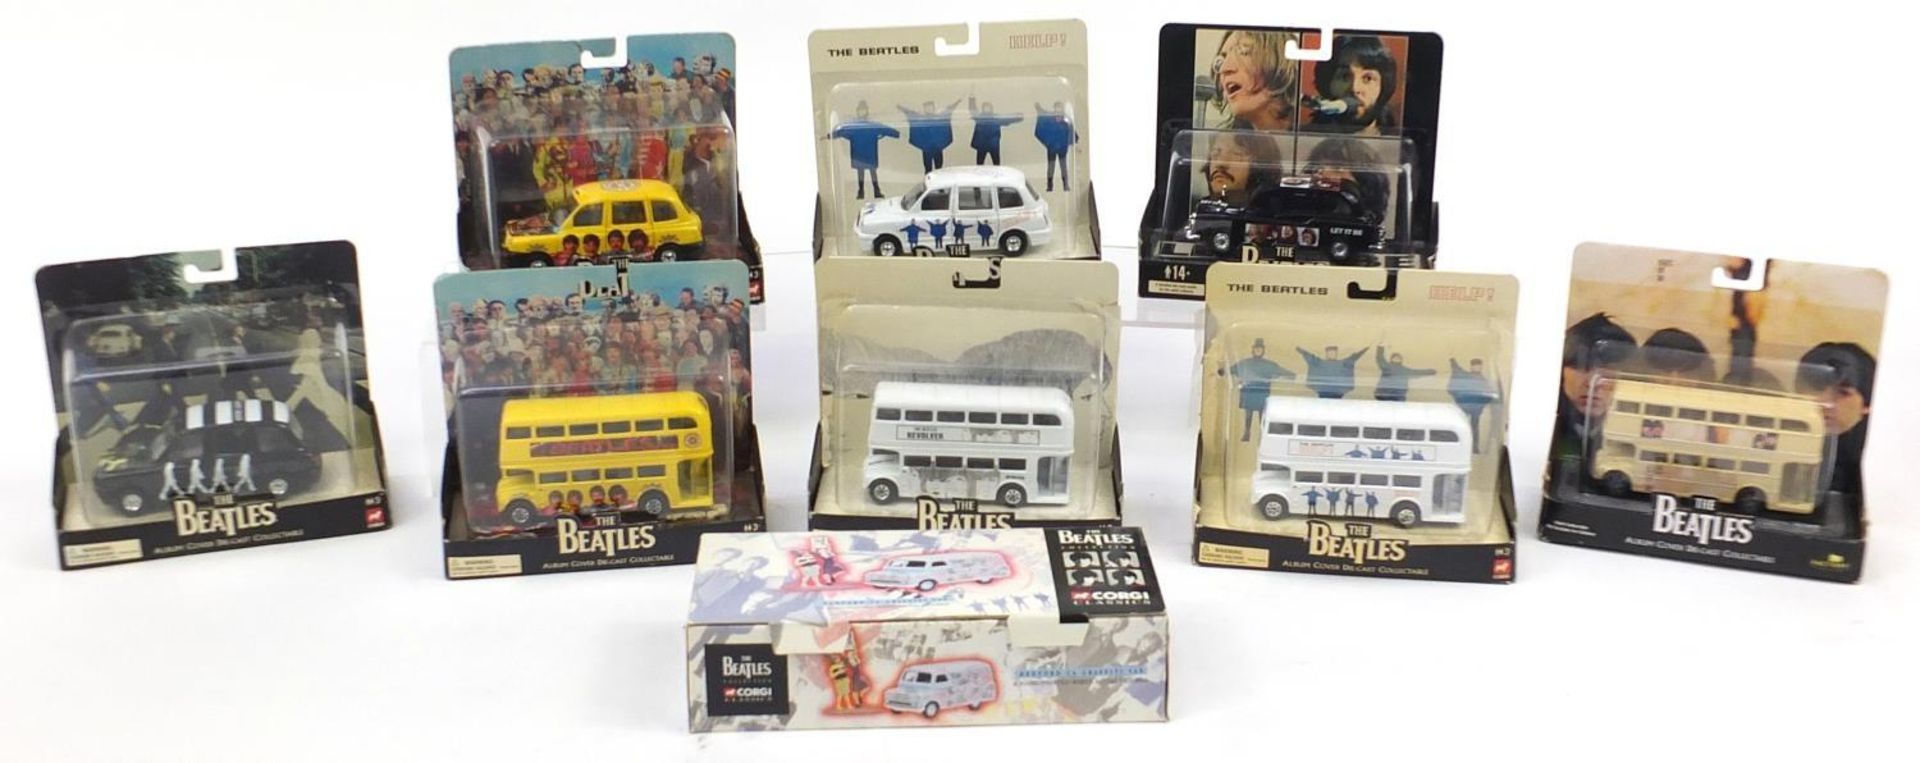 Corgi Beatles die cast vehicles with boxes including Help and Abbey Road